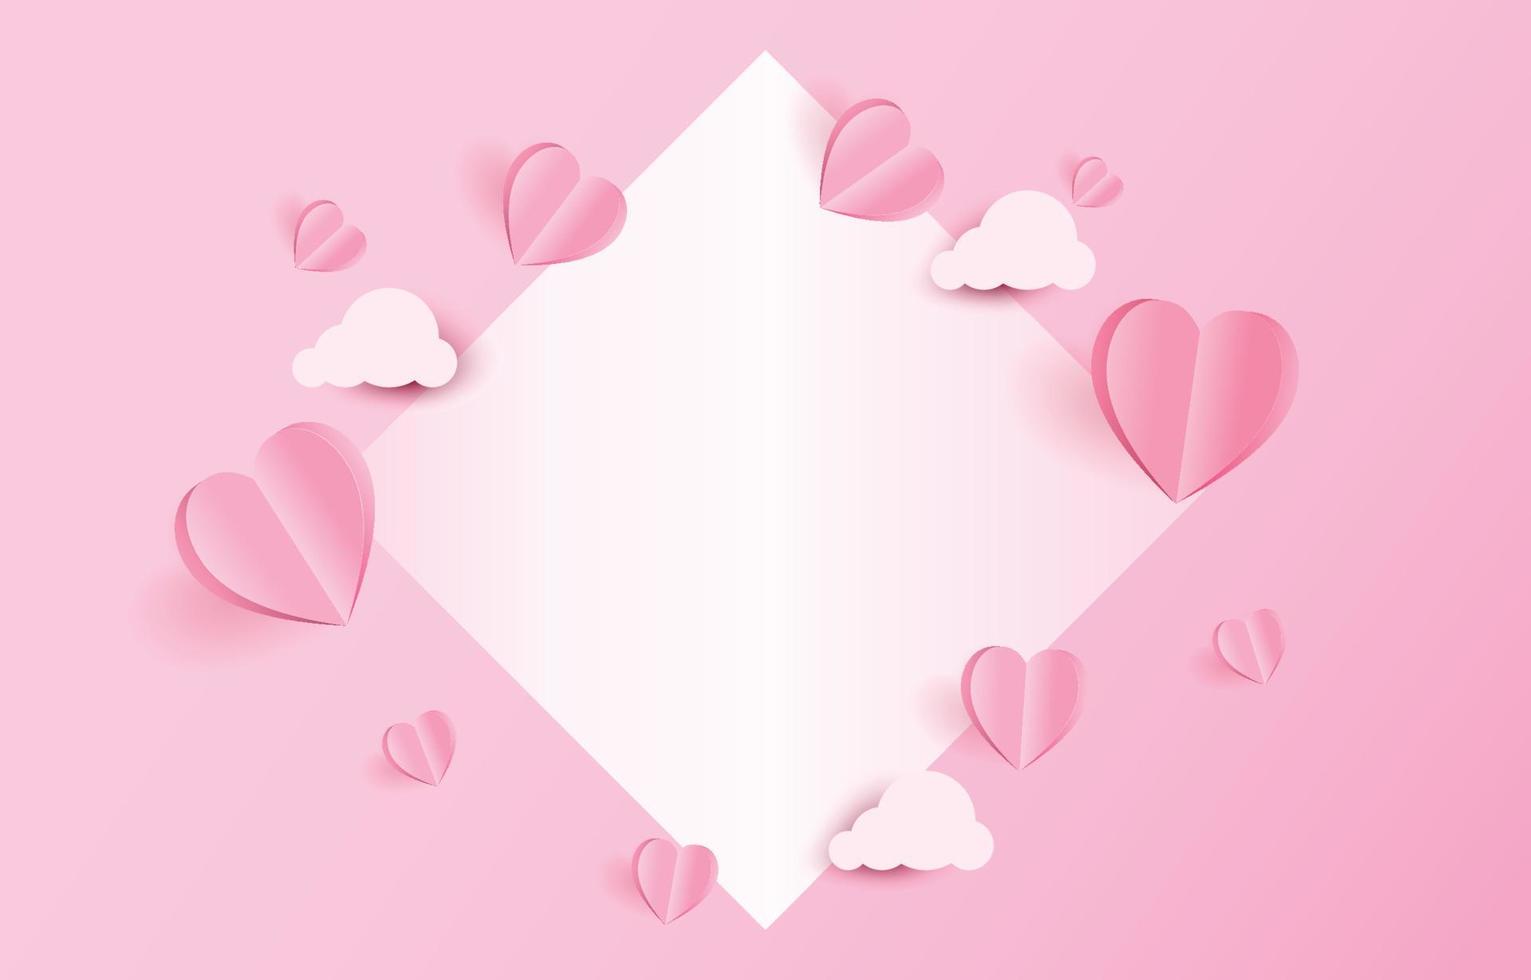 Paper cut elements in shape of heart flying and clouds on pink and sweet background with a blank rectangle. Vector symbols of love for Happy Valentine's Day, birthday greeting card design.